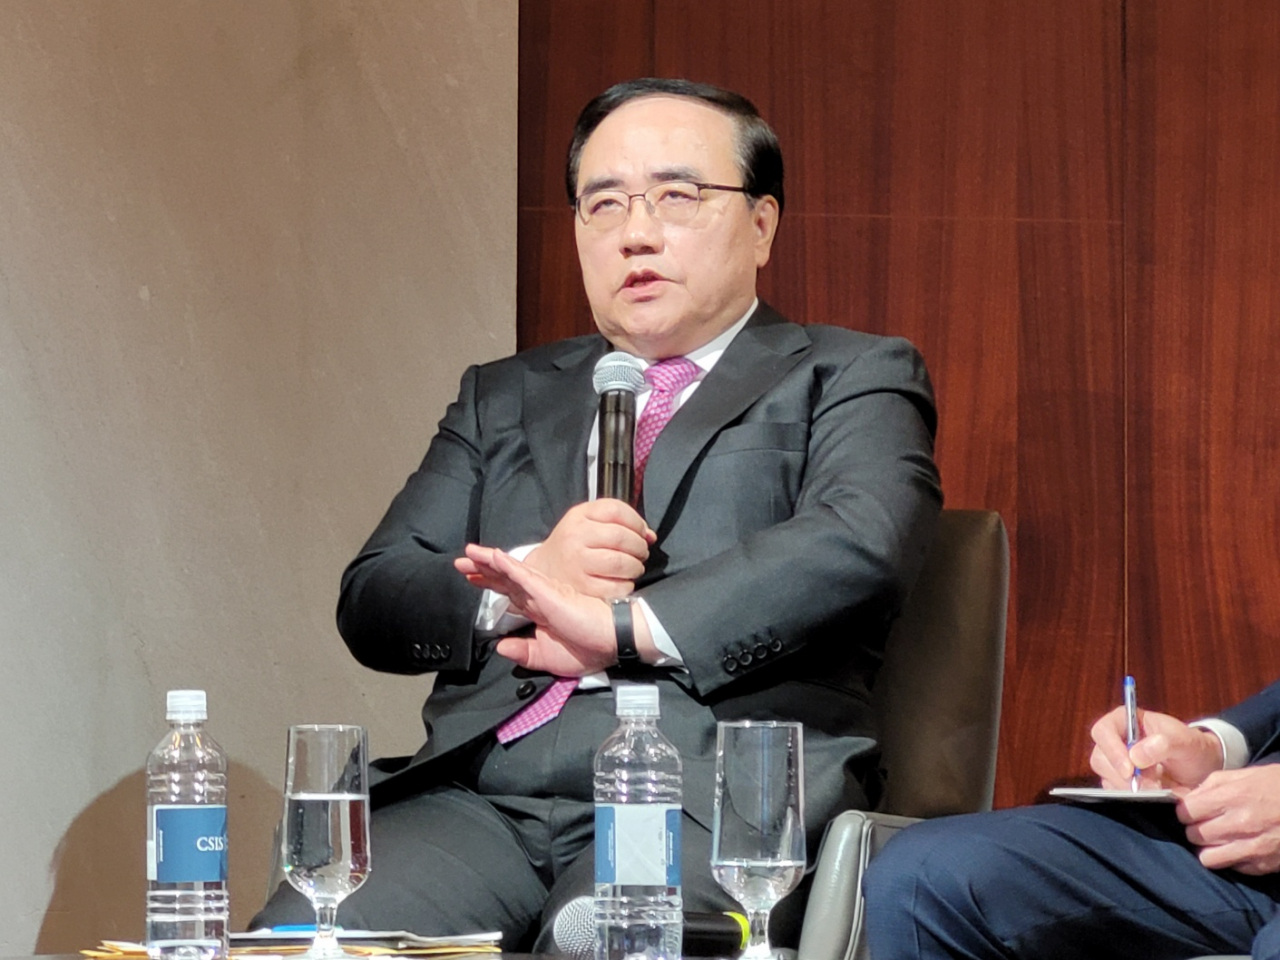 Former South Korean National Security Adviser Kim Sung-han speaks during a forum hosted by the Center for Strategic and International Studies in Washington on Monday. (Yonhap)